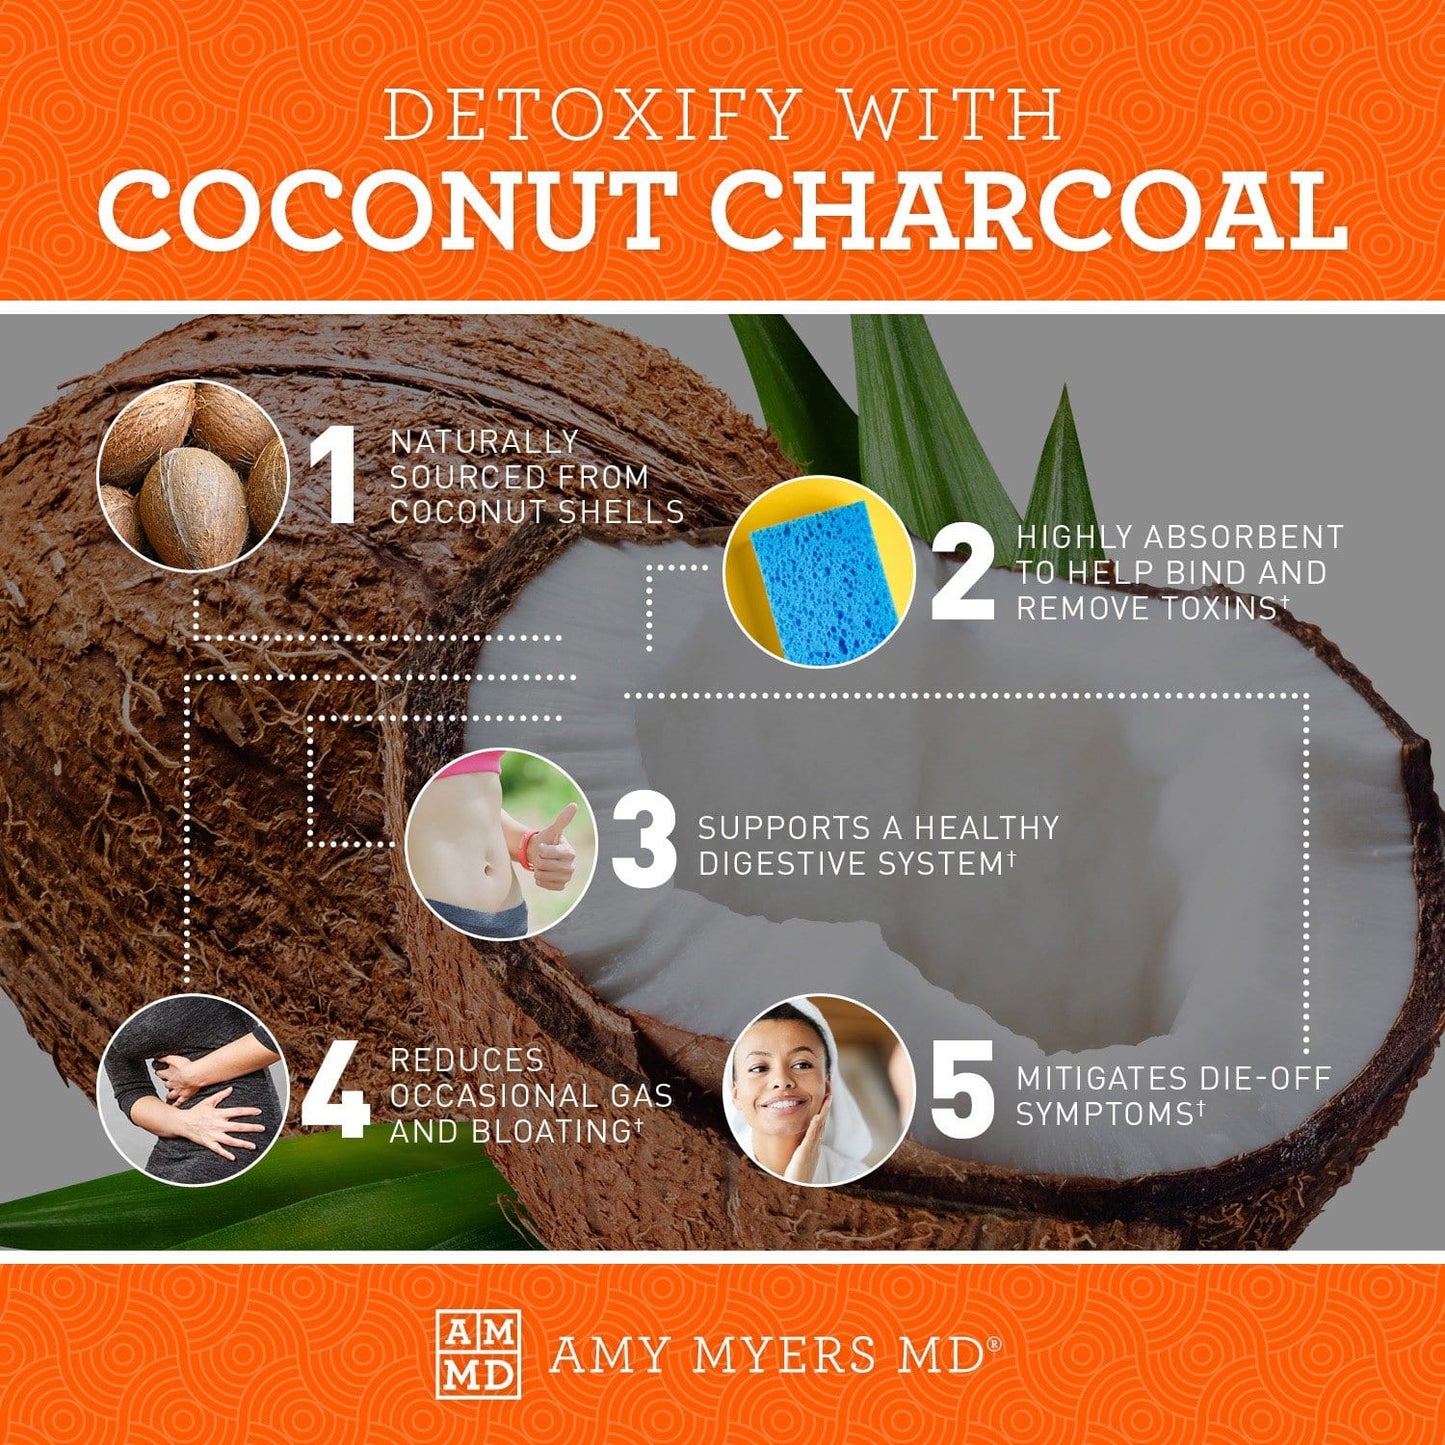 Coconut Charcoal by Amy Myers MD